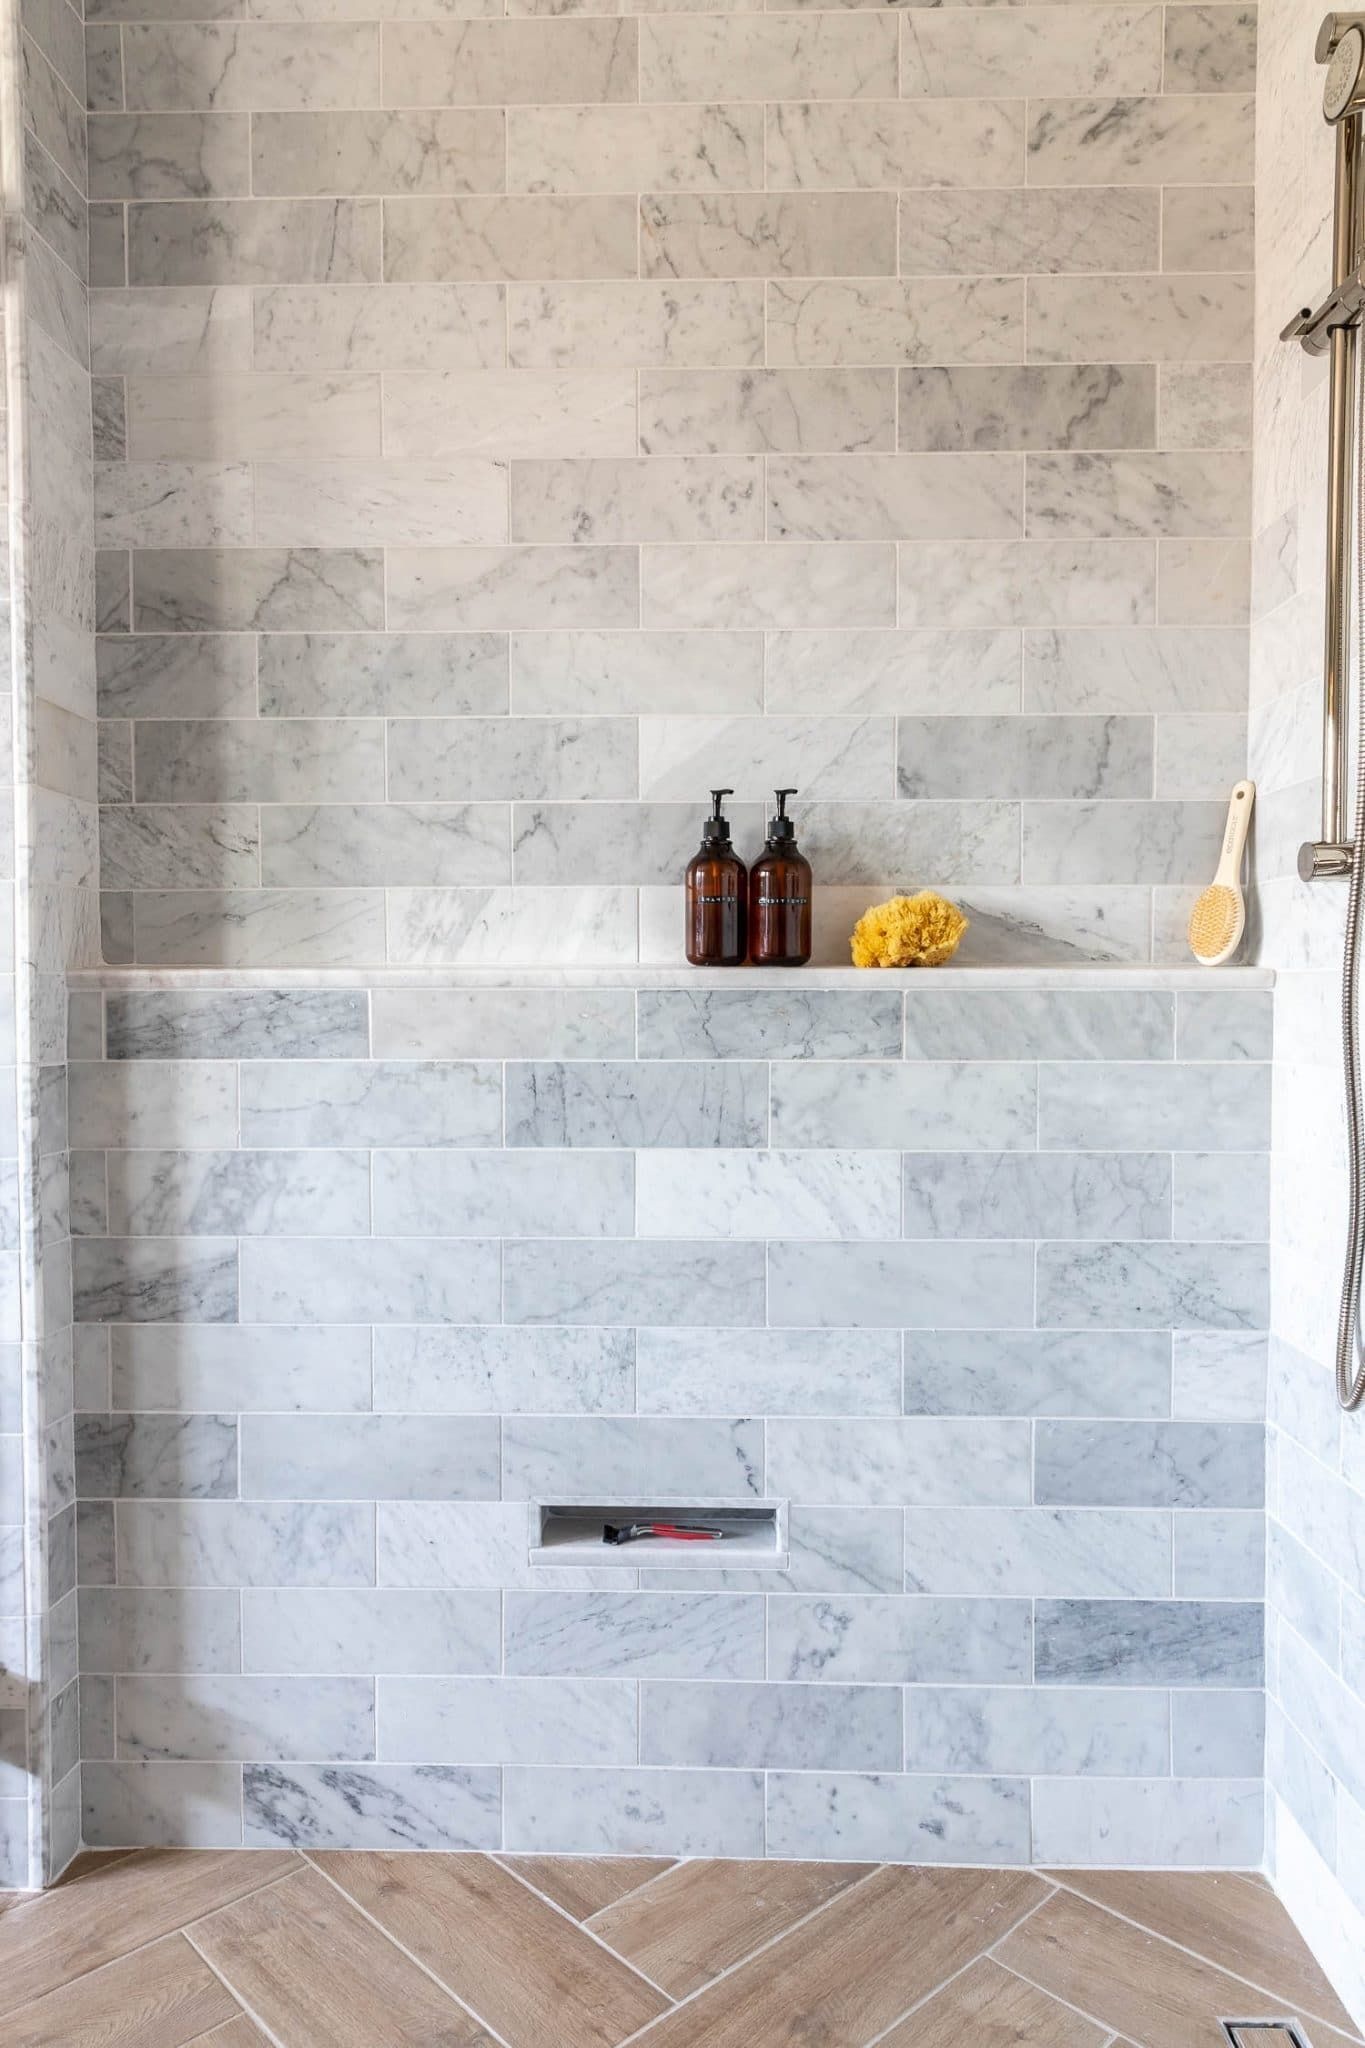 A Simple Shower Niche with Extra Small Storage